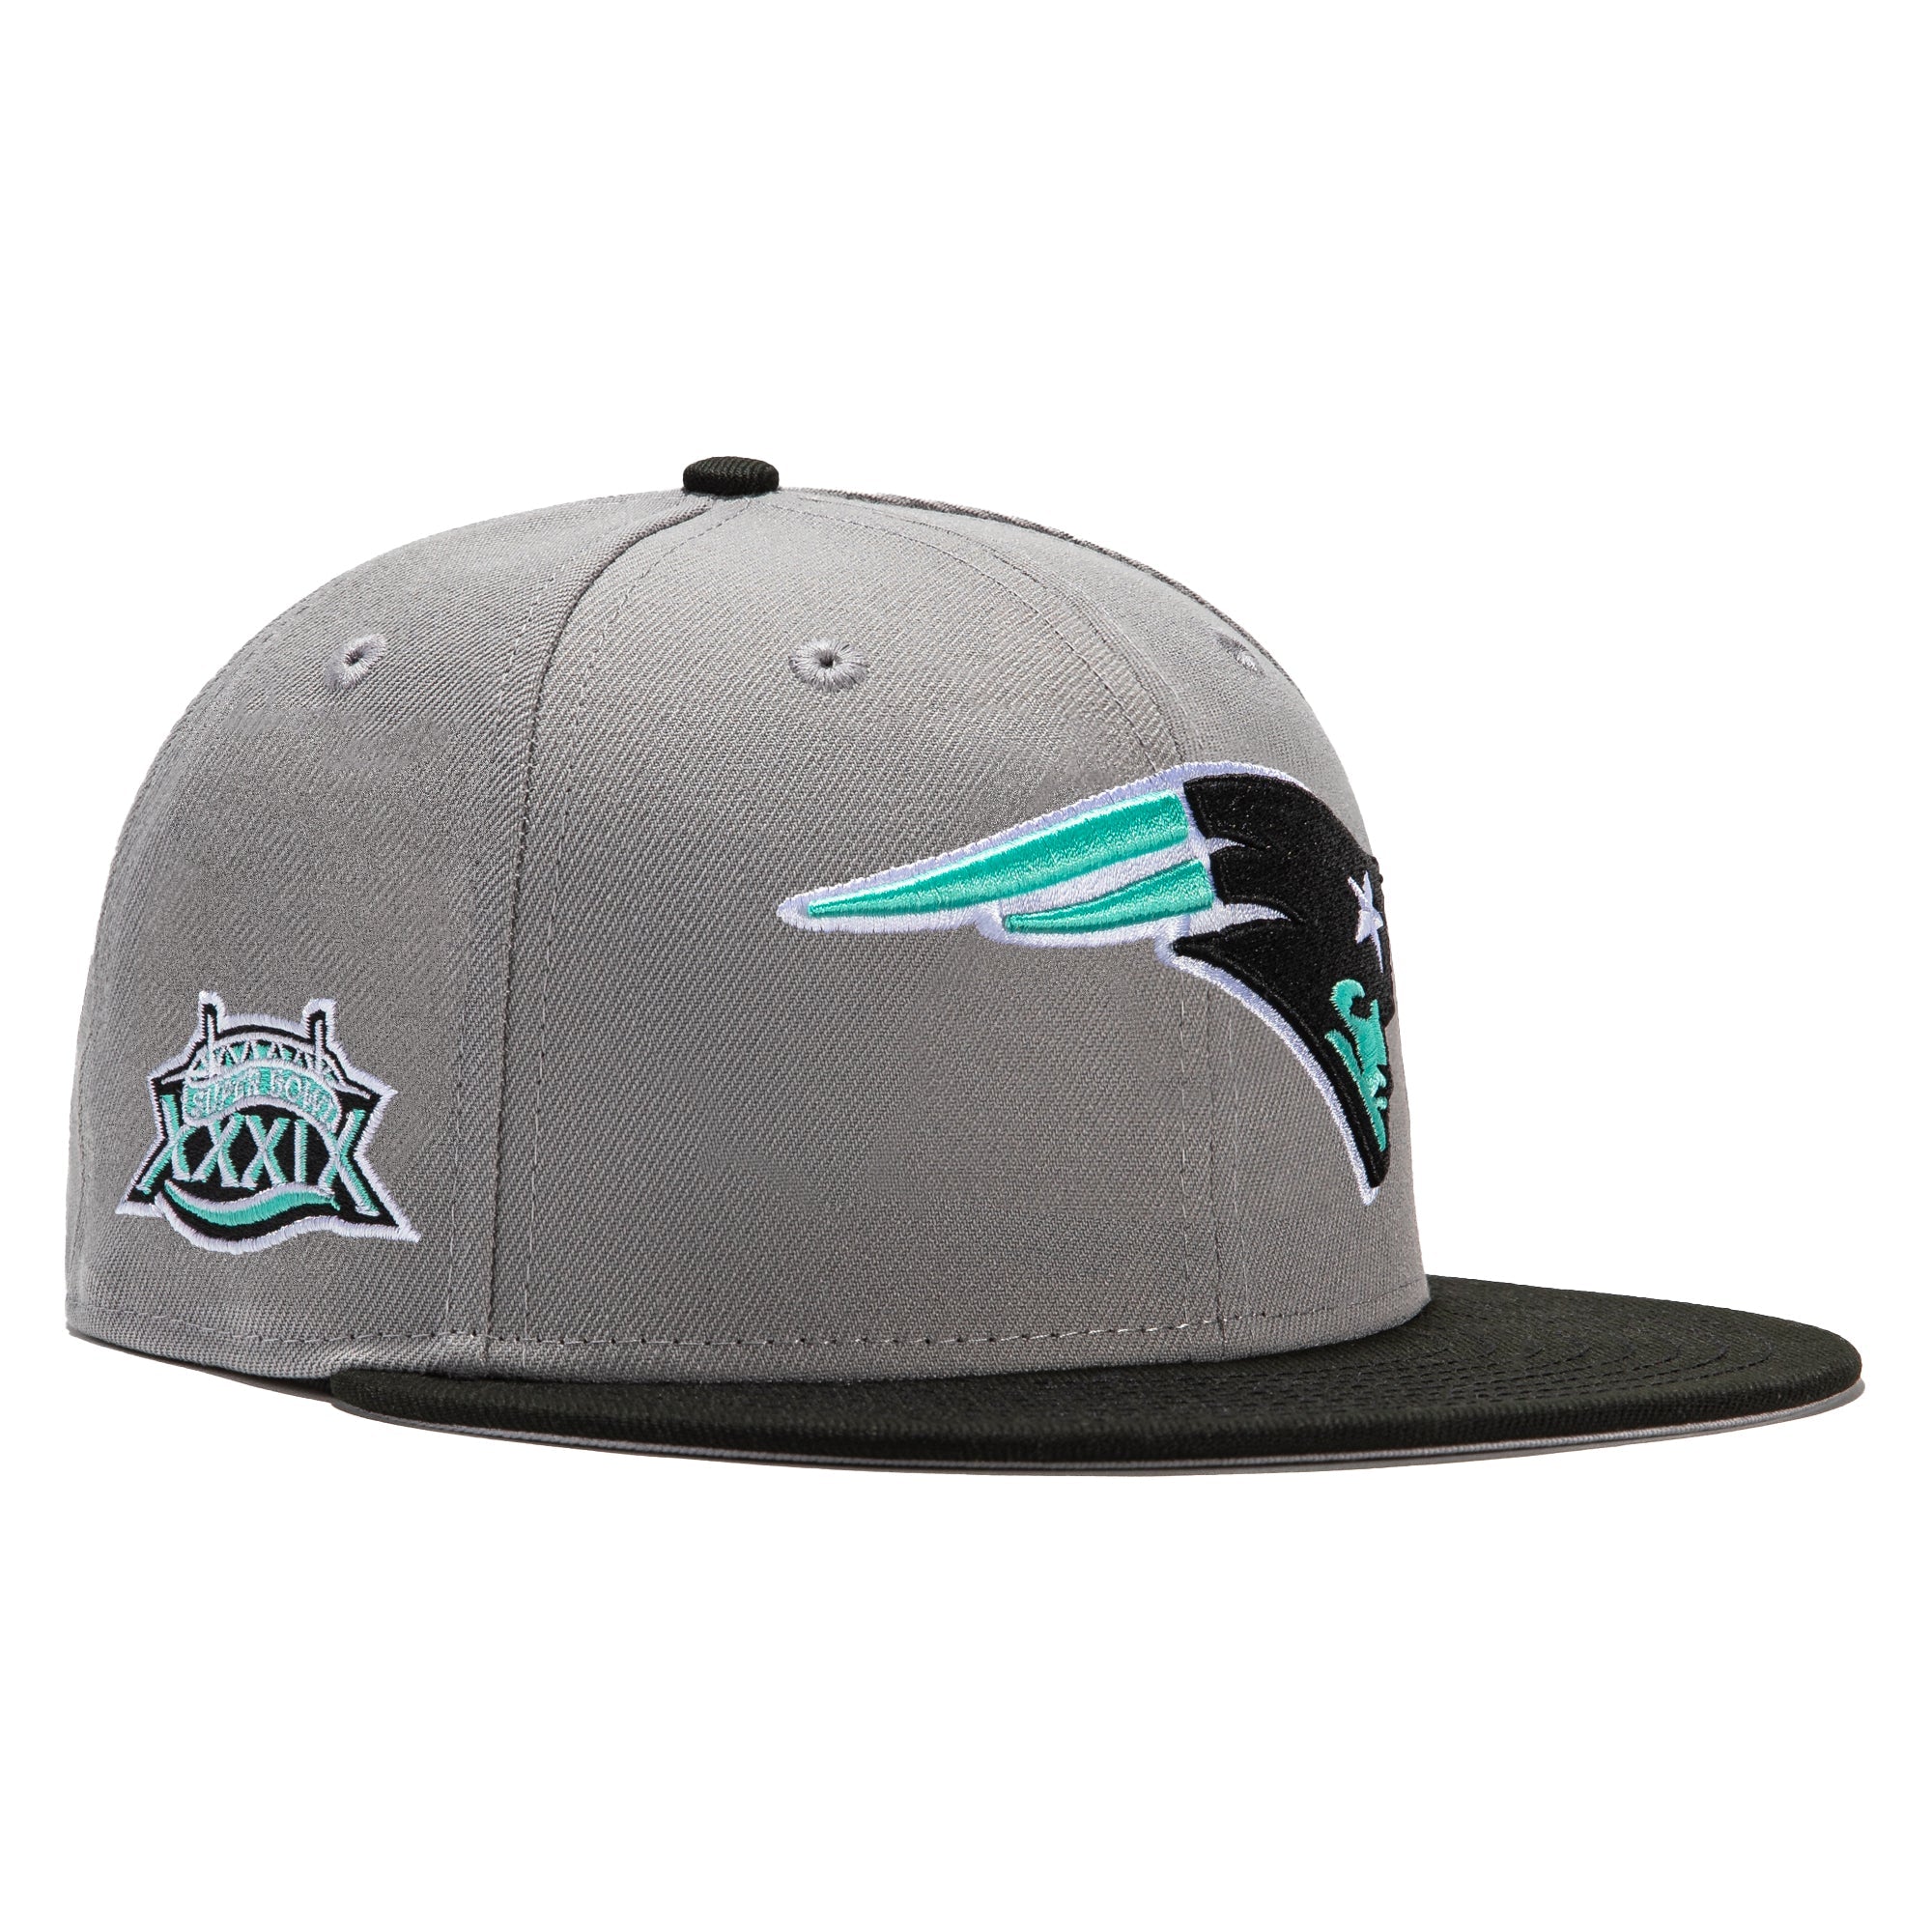 Minty Mountain 2022 Fitted Hats